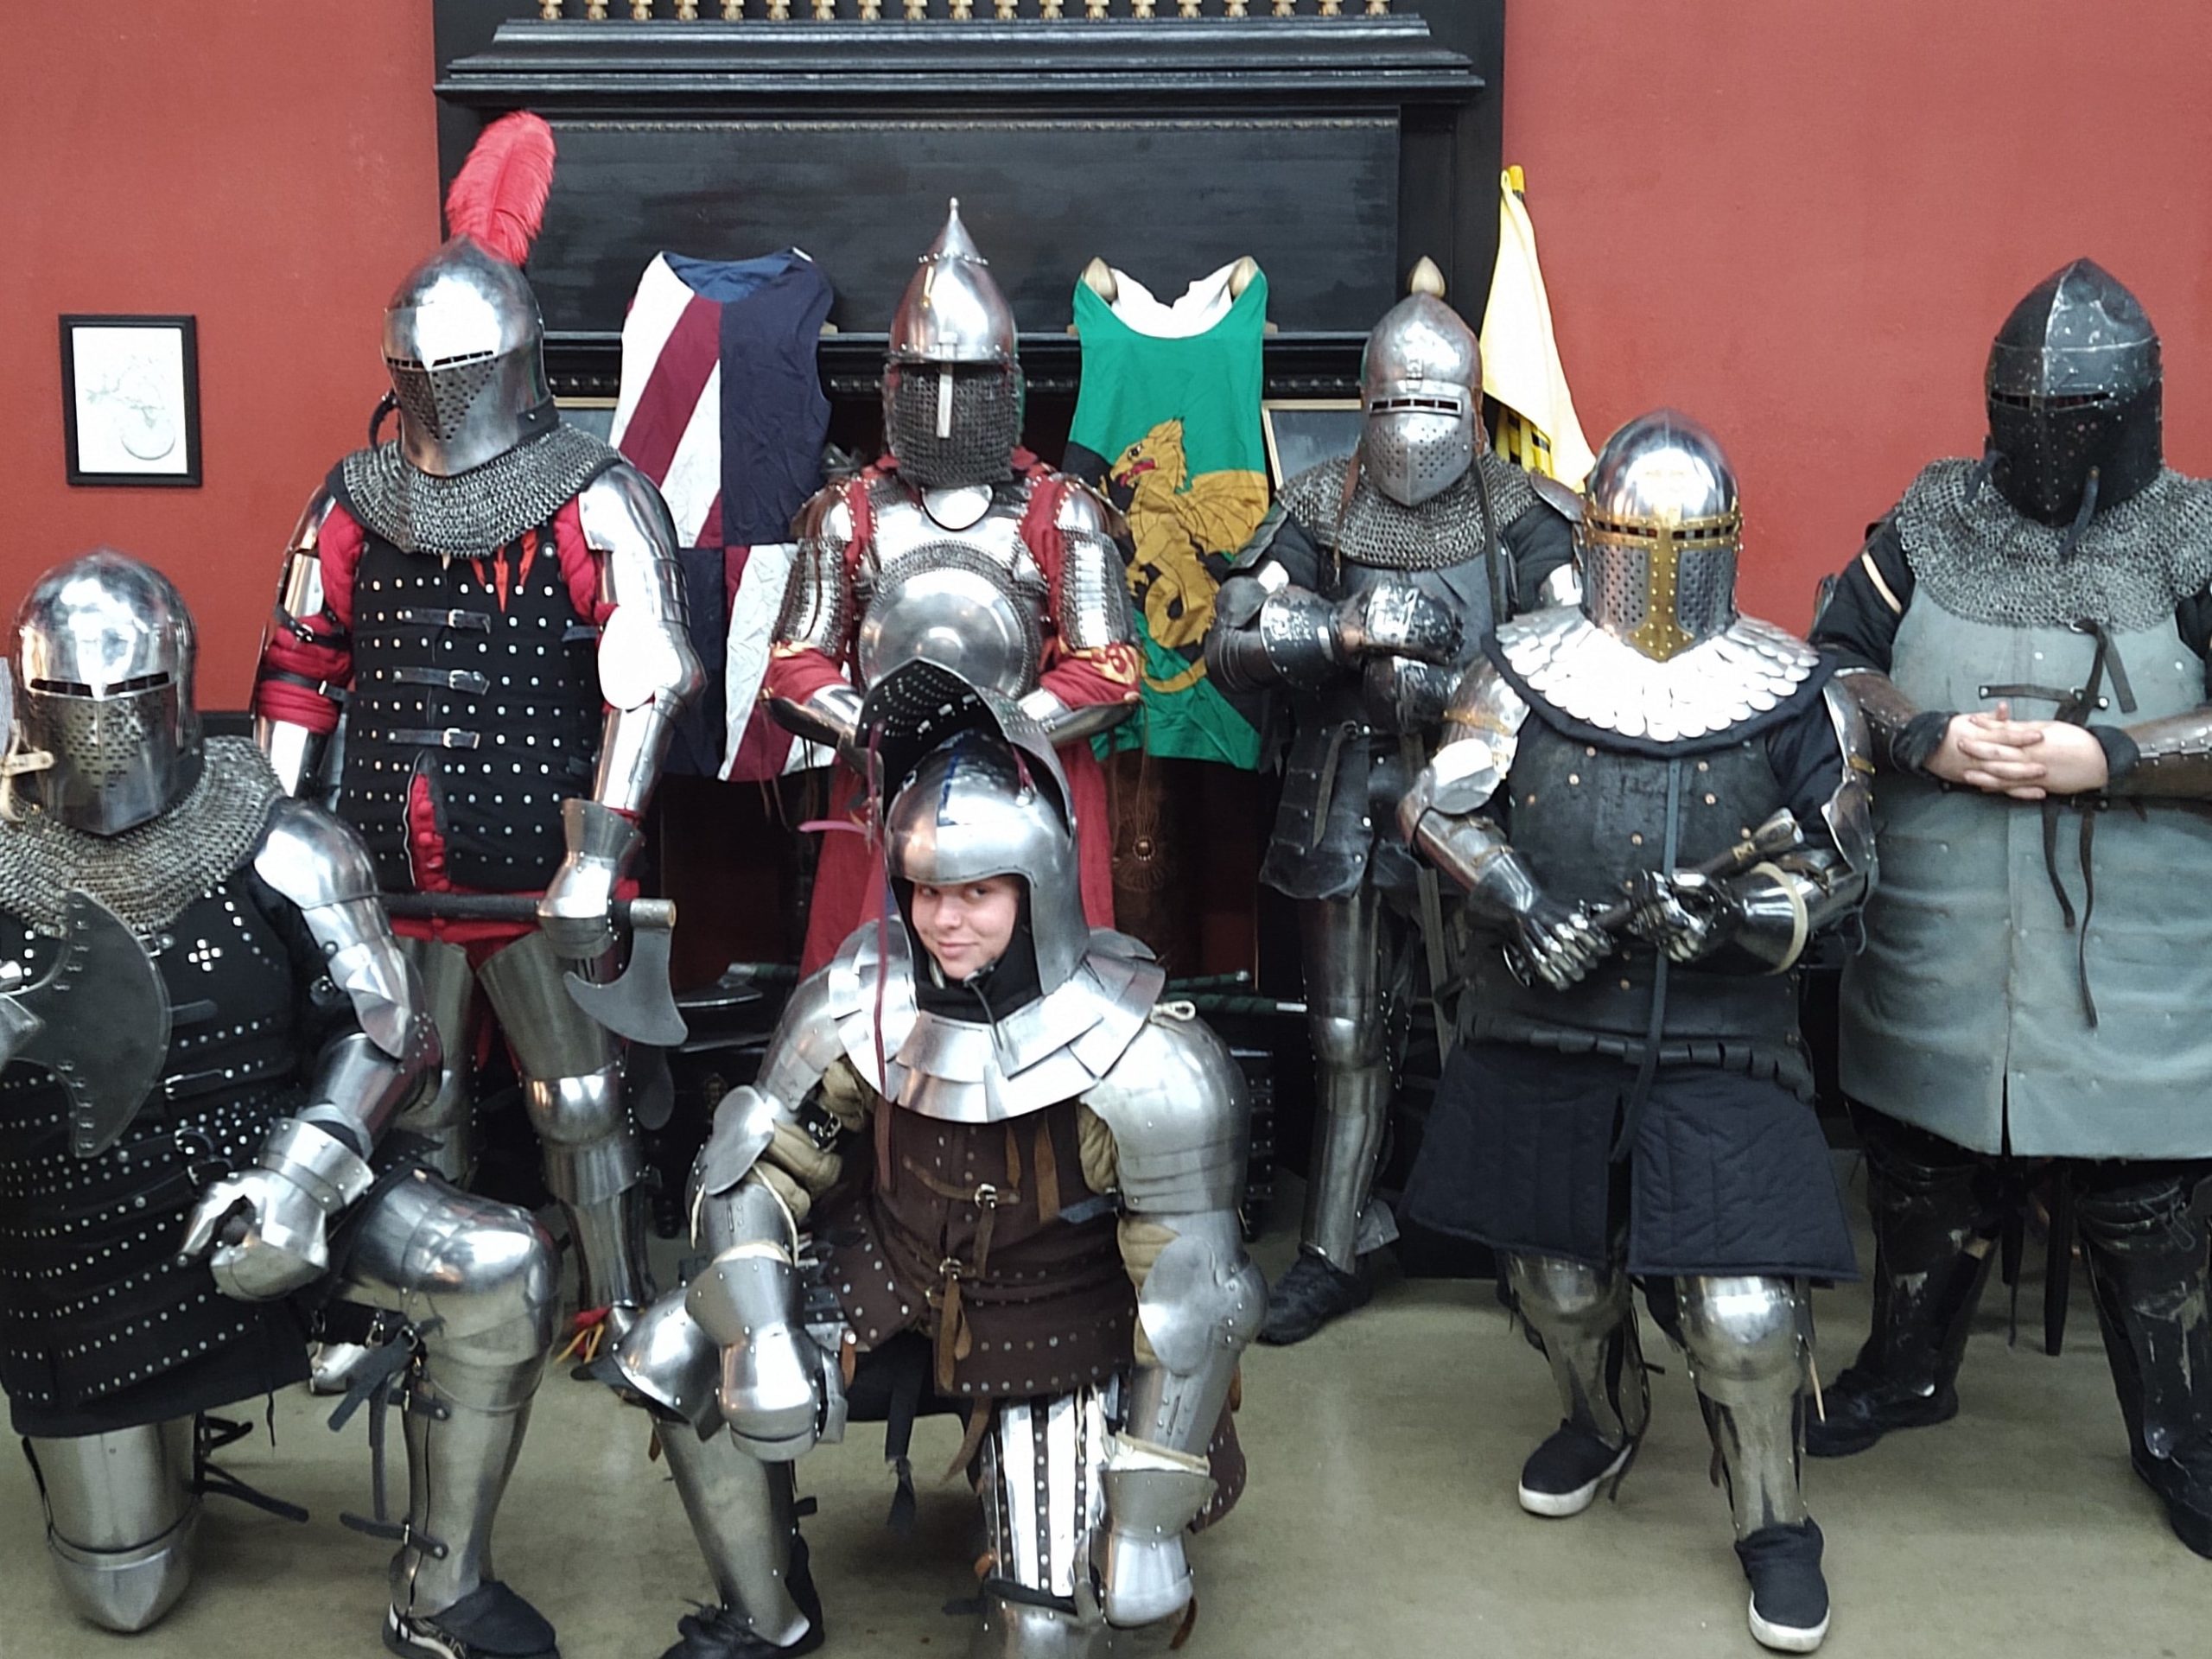 People dressed as knights in armor